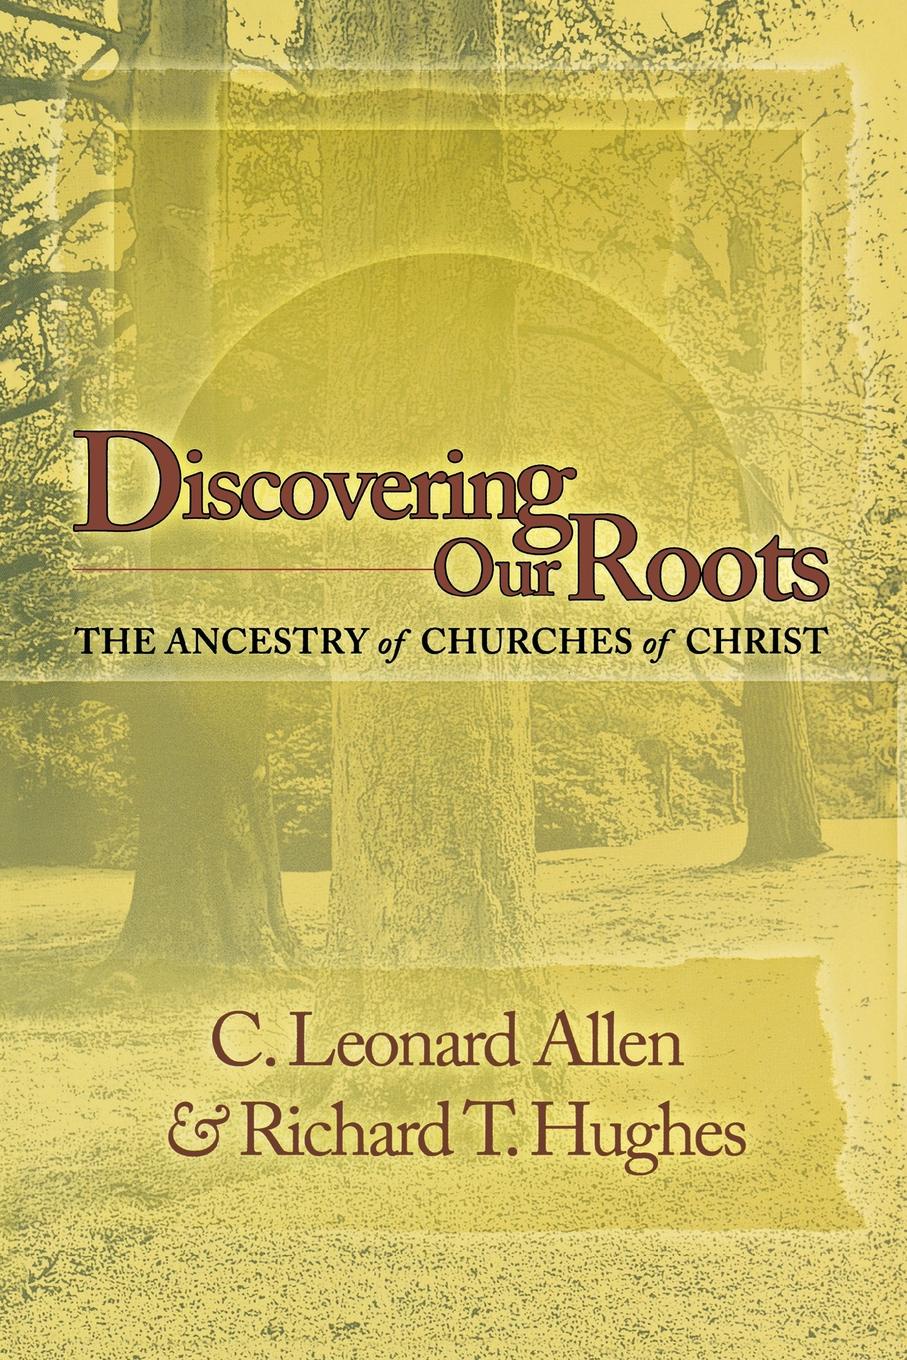 Discovering Our Roots. The Ancestry of Churches of Christ